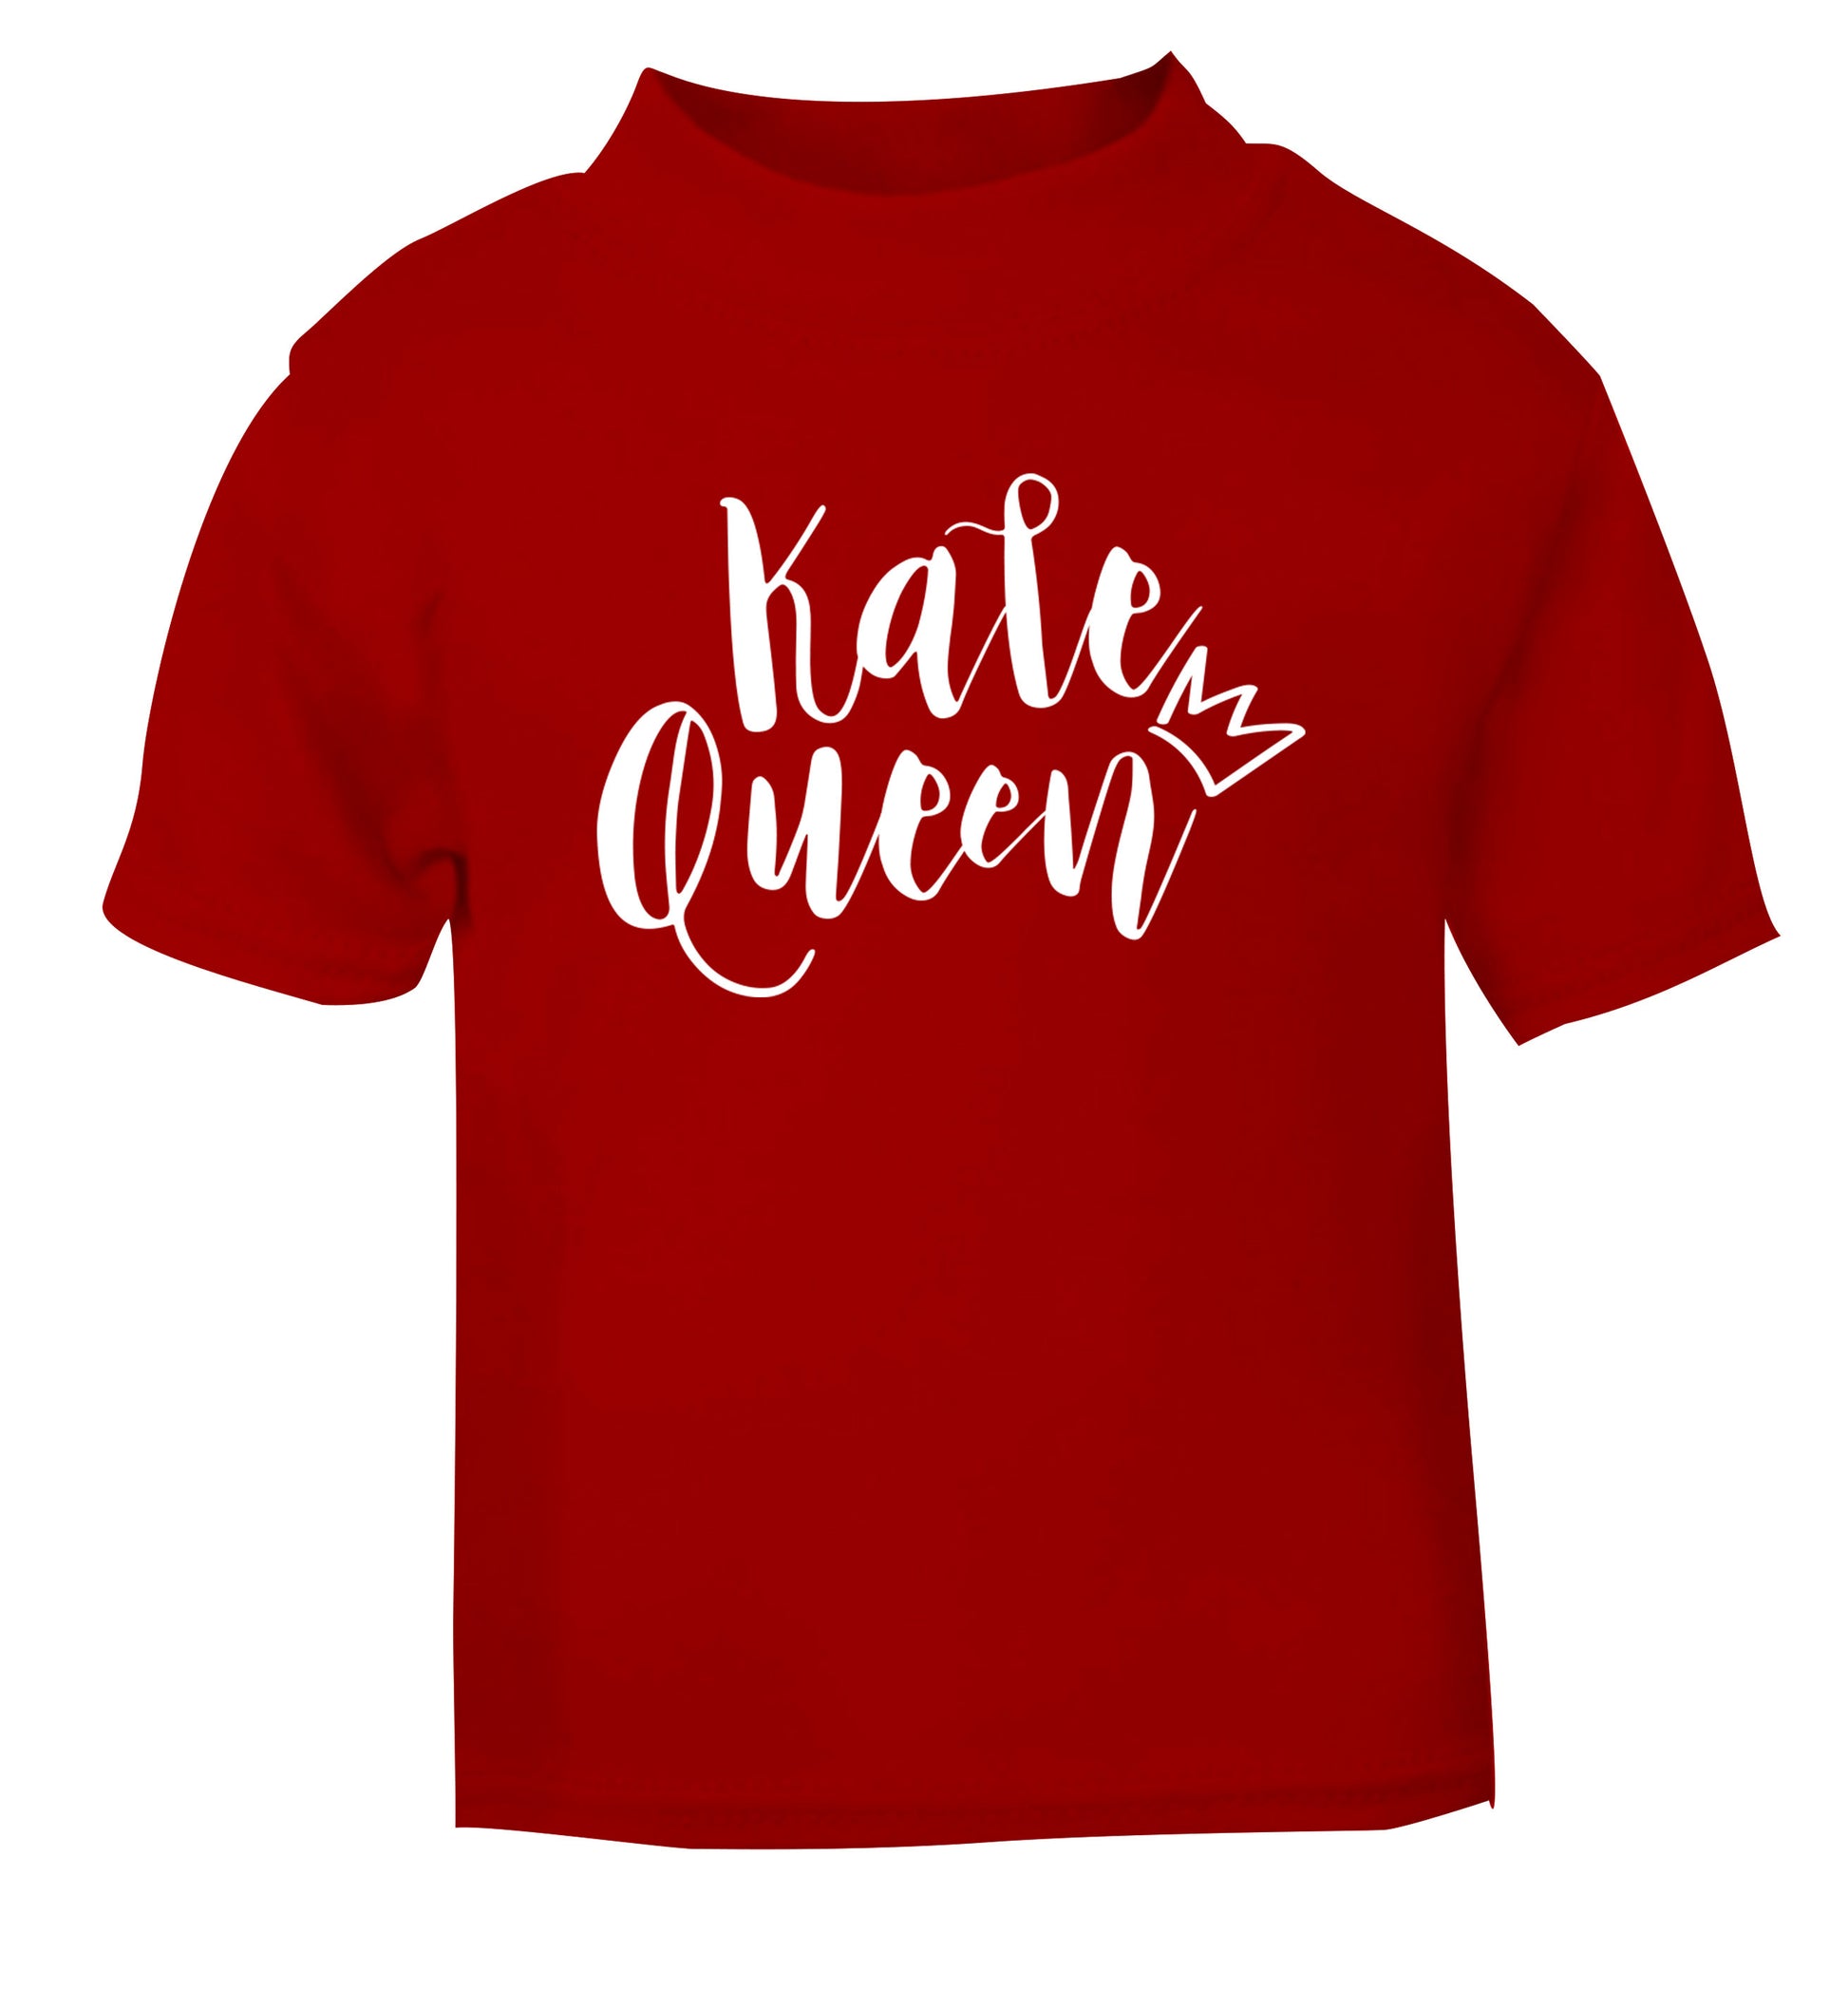 Kale Queen red Baby Toddler Tshirt 2 Years